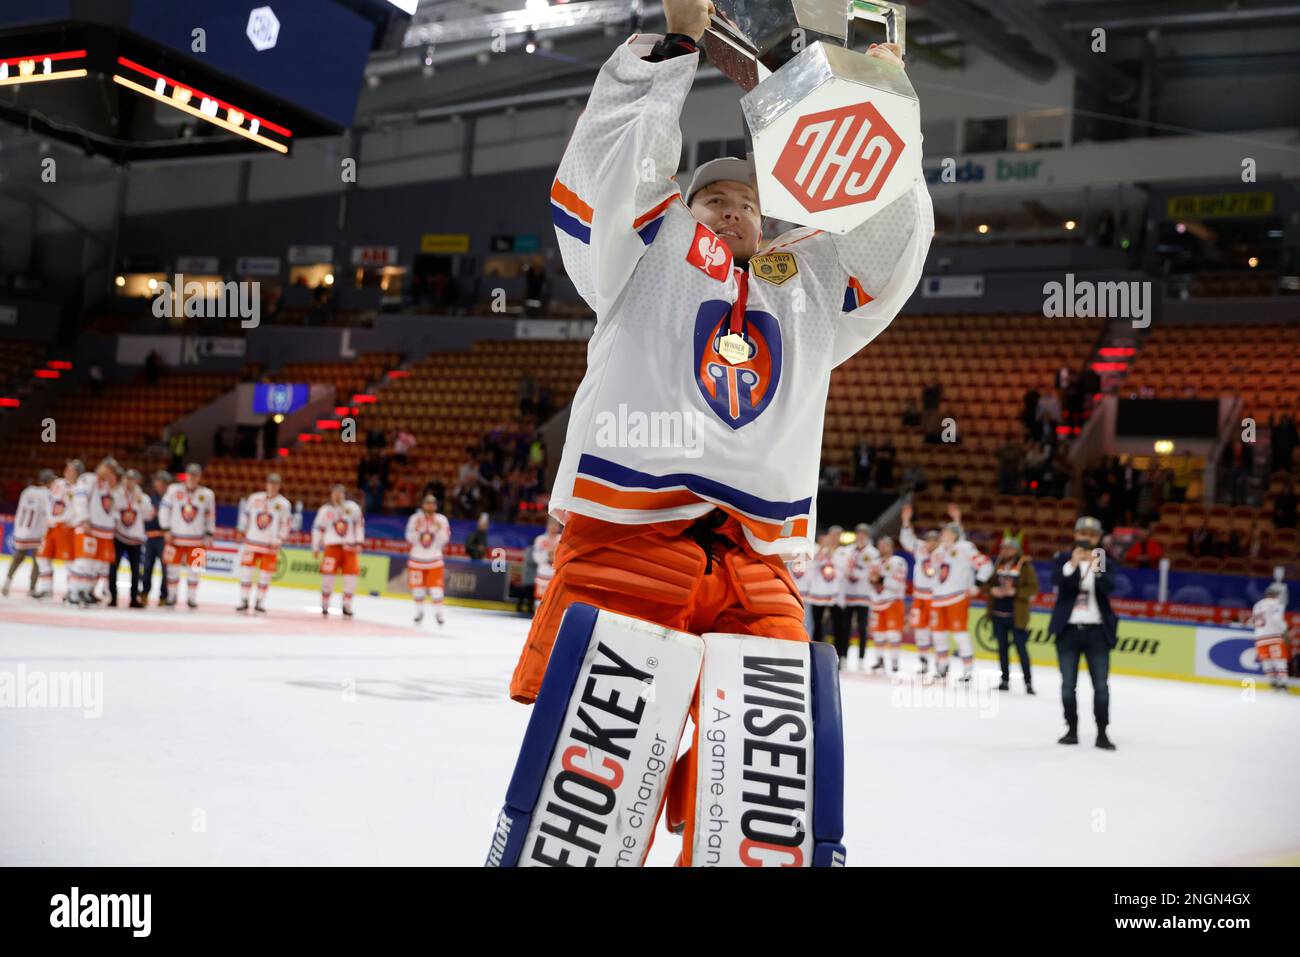 Tapparas Anton Levtchi lifts the trophy as they celebrate winning the Champions Hockey League final ice hockey match between Lulea Hockey and Tappara Tampere at Coop Norrbotten Arena in Lulea, Sweden, Saturday